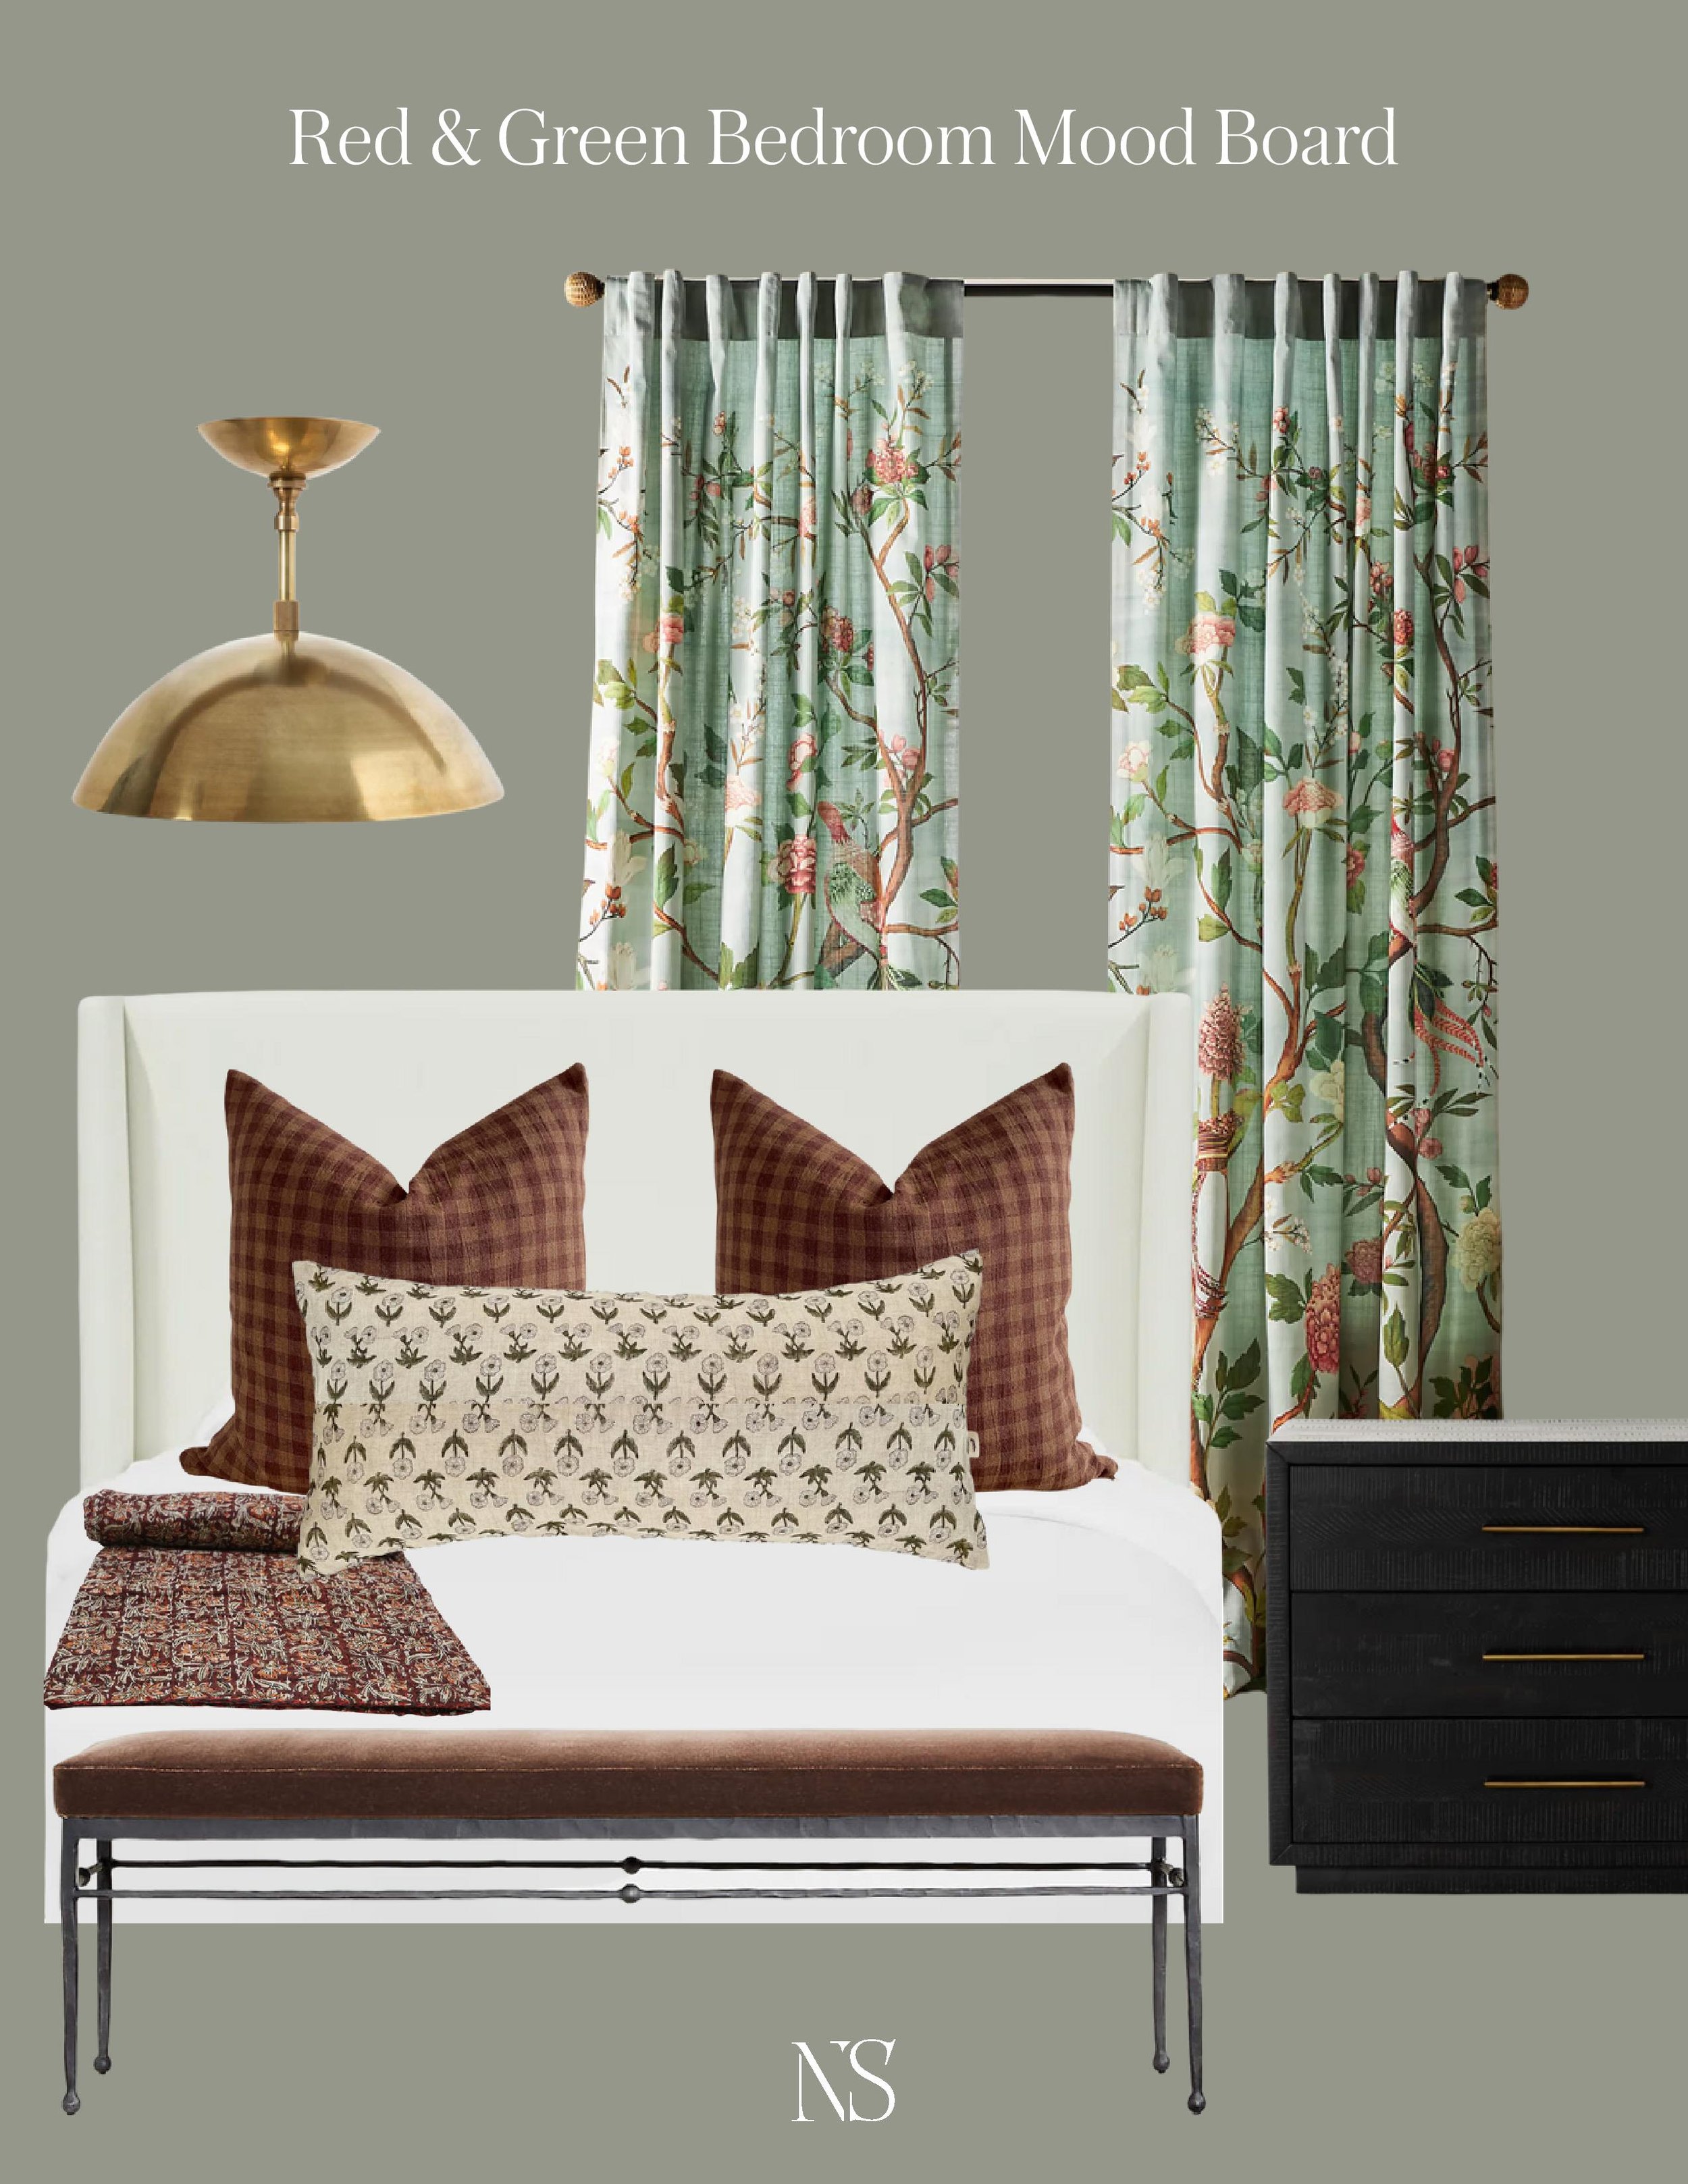 Red and green bedroom mood board makeover. Evergreen Fog by Sherwin Williams paint color. Green and red patterned curtains. Red kantha quilt. Brass flush mount light. Design by Nadine Stay